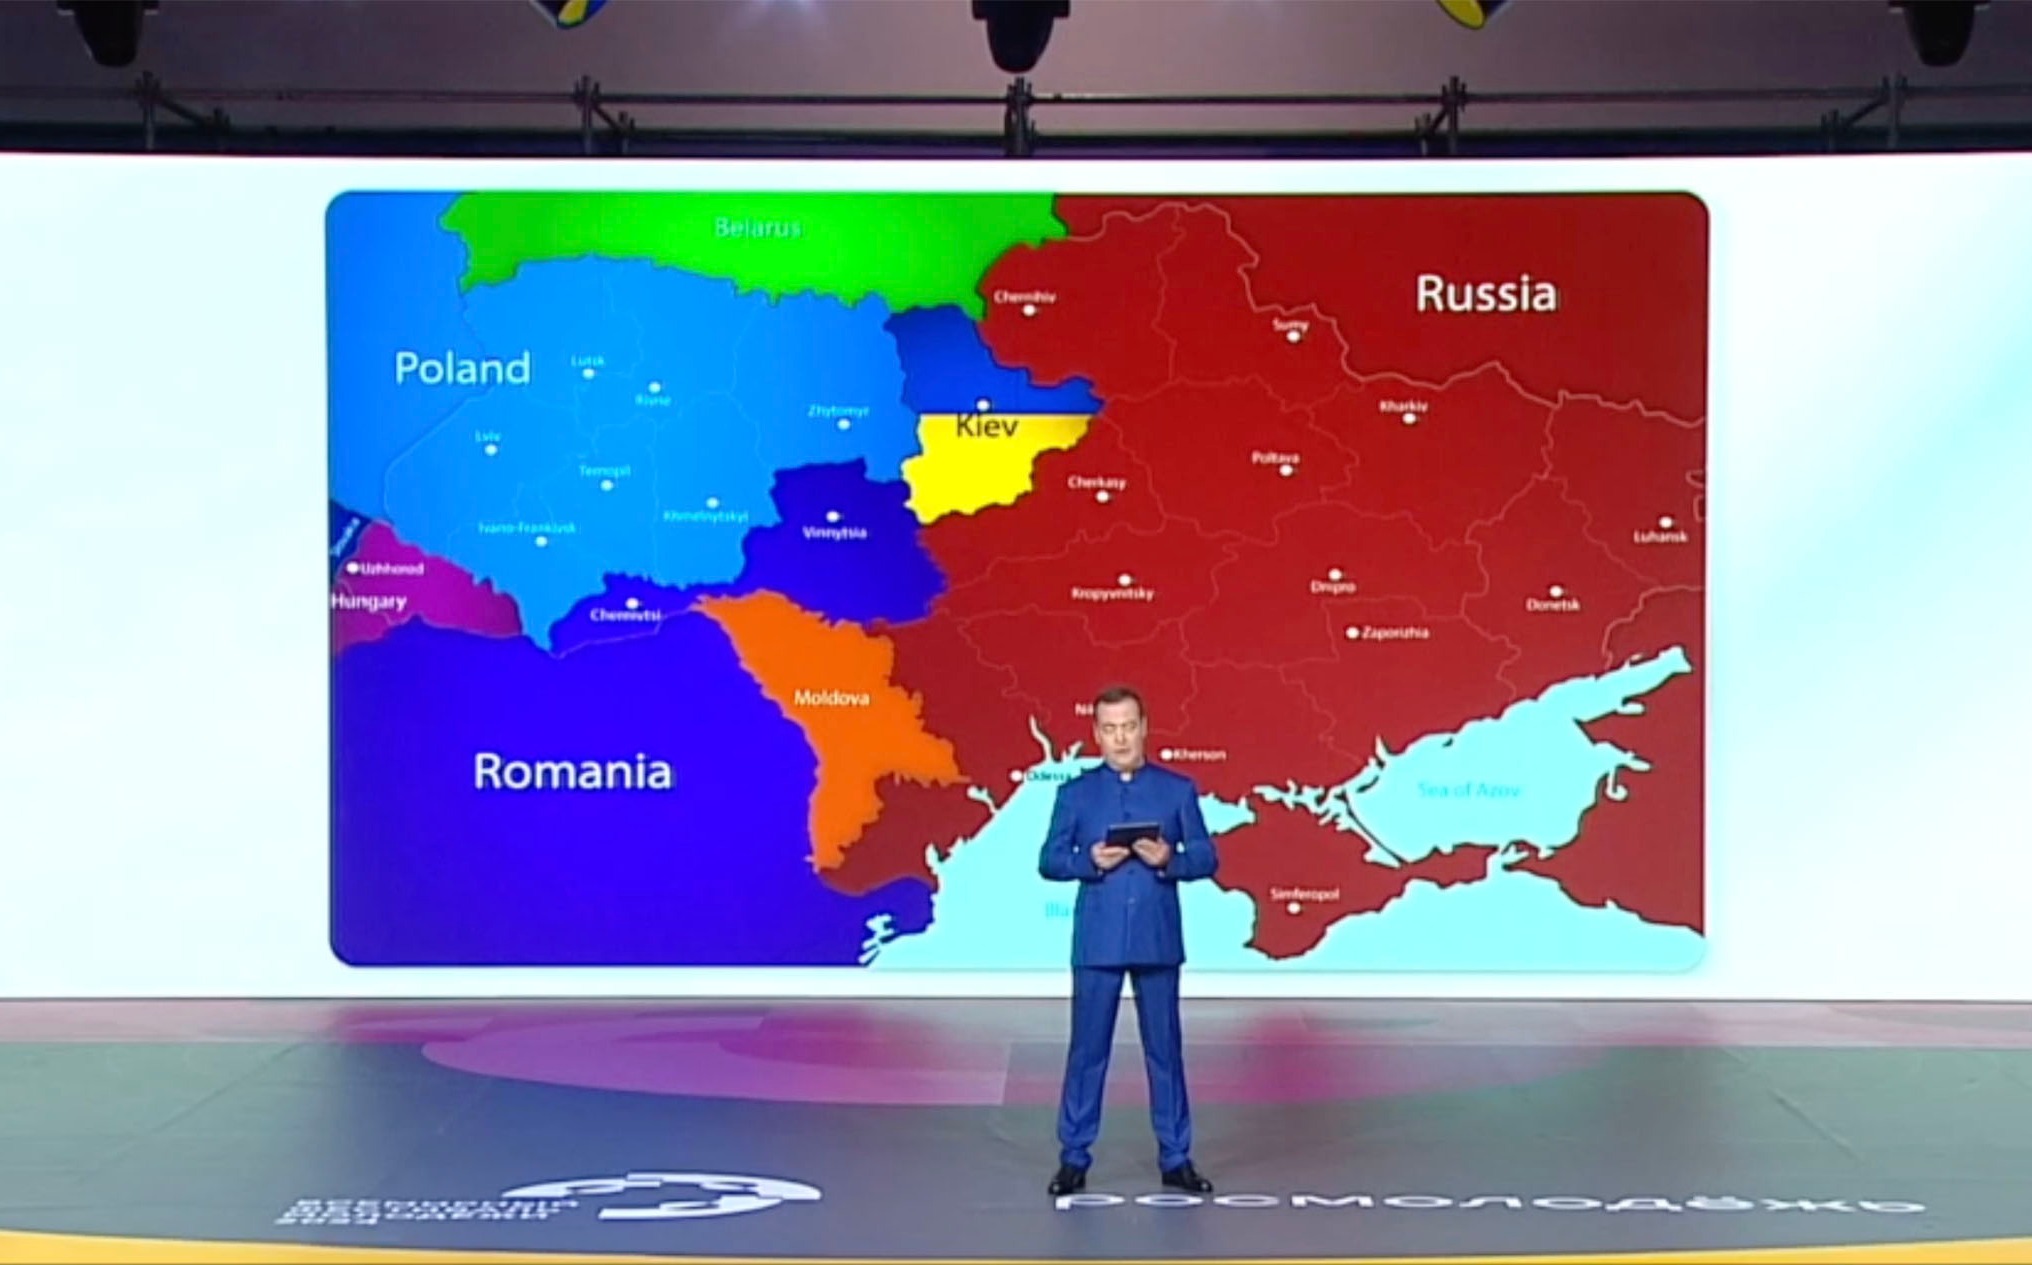 Dmitry Medvedev delivers a disturbing speech about Russia eating up Ukraine's land - with the chilling map behind him